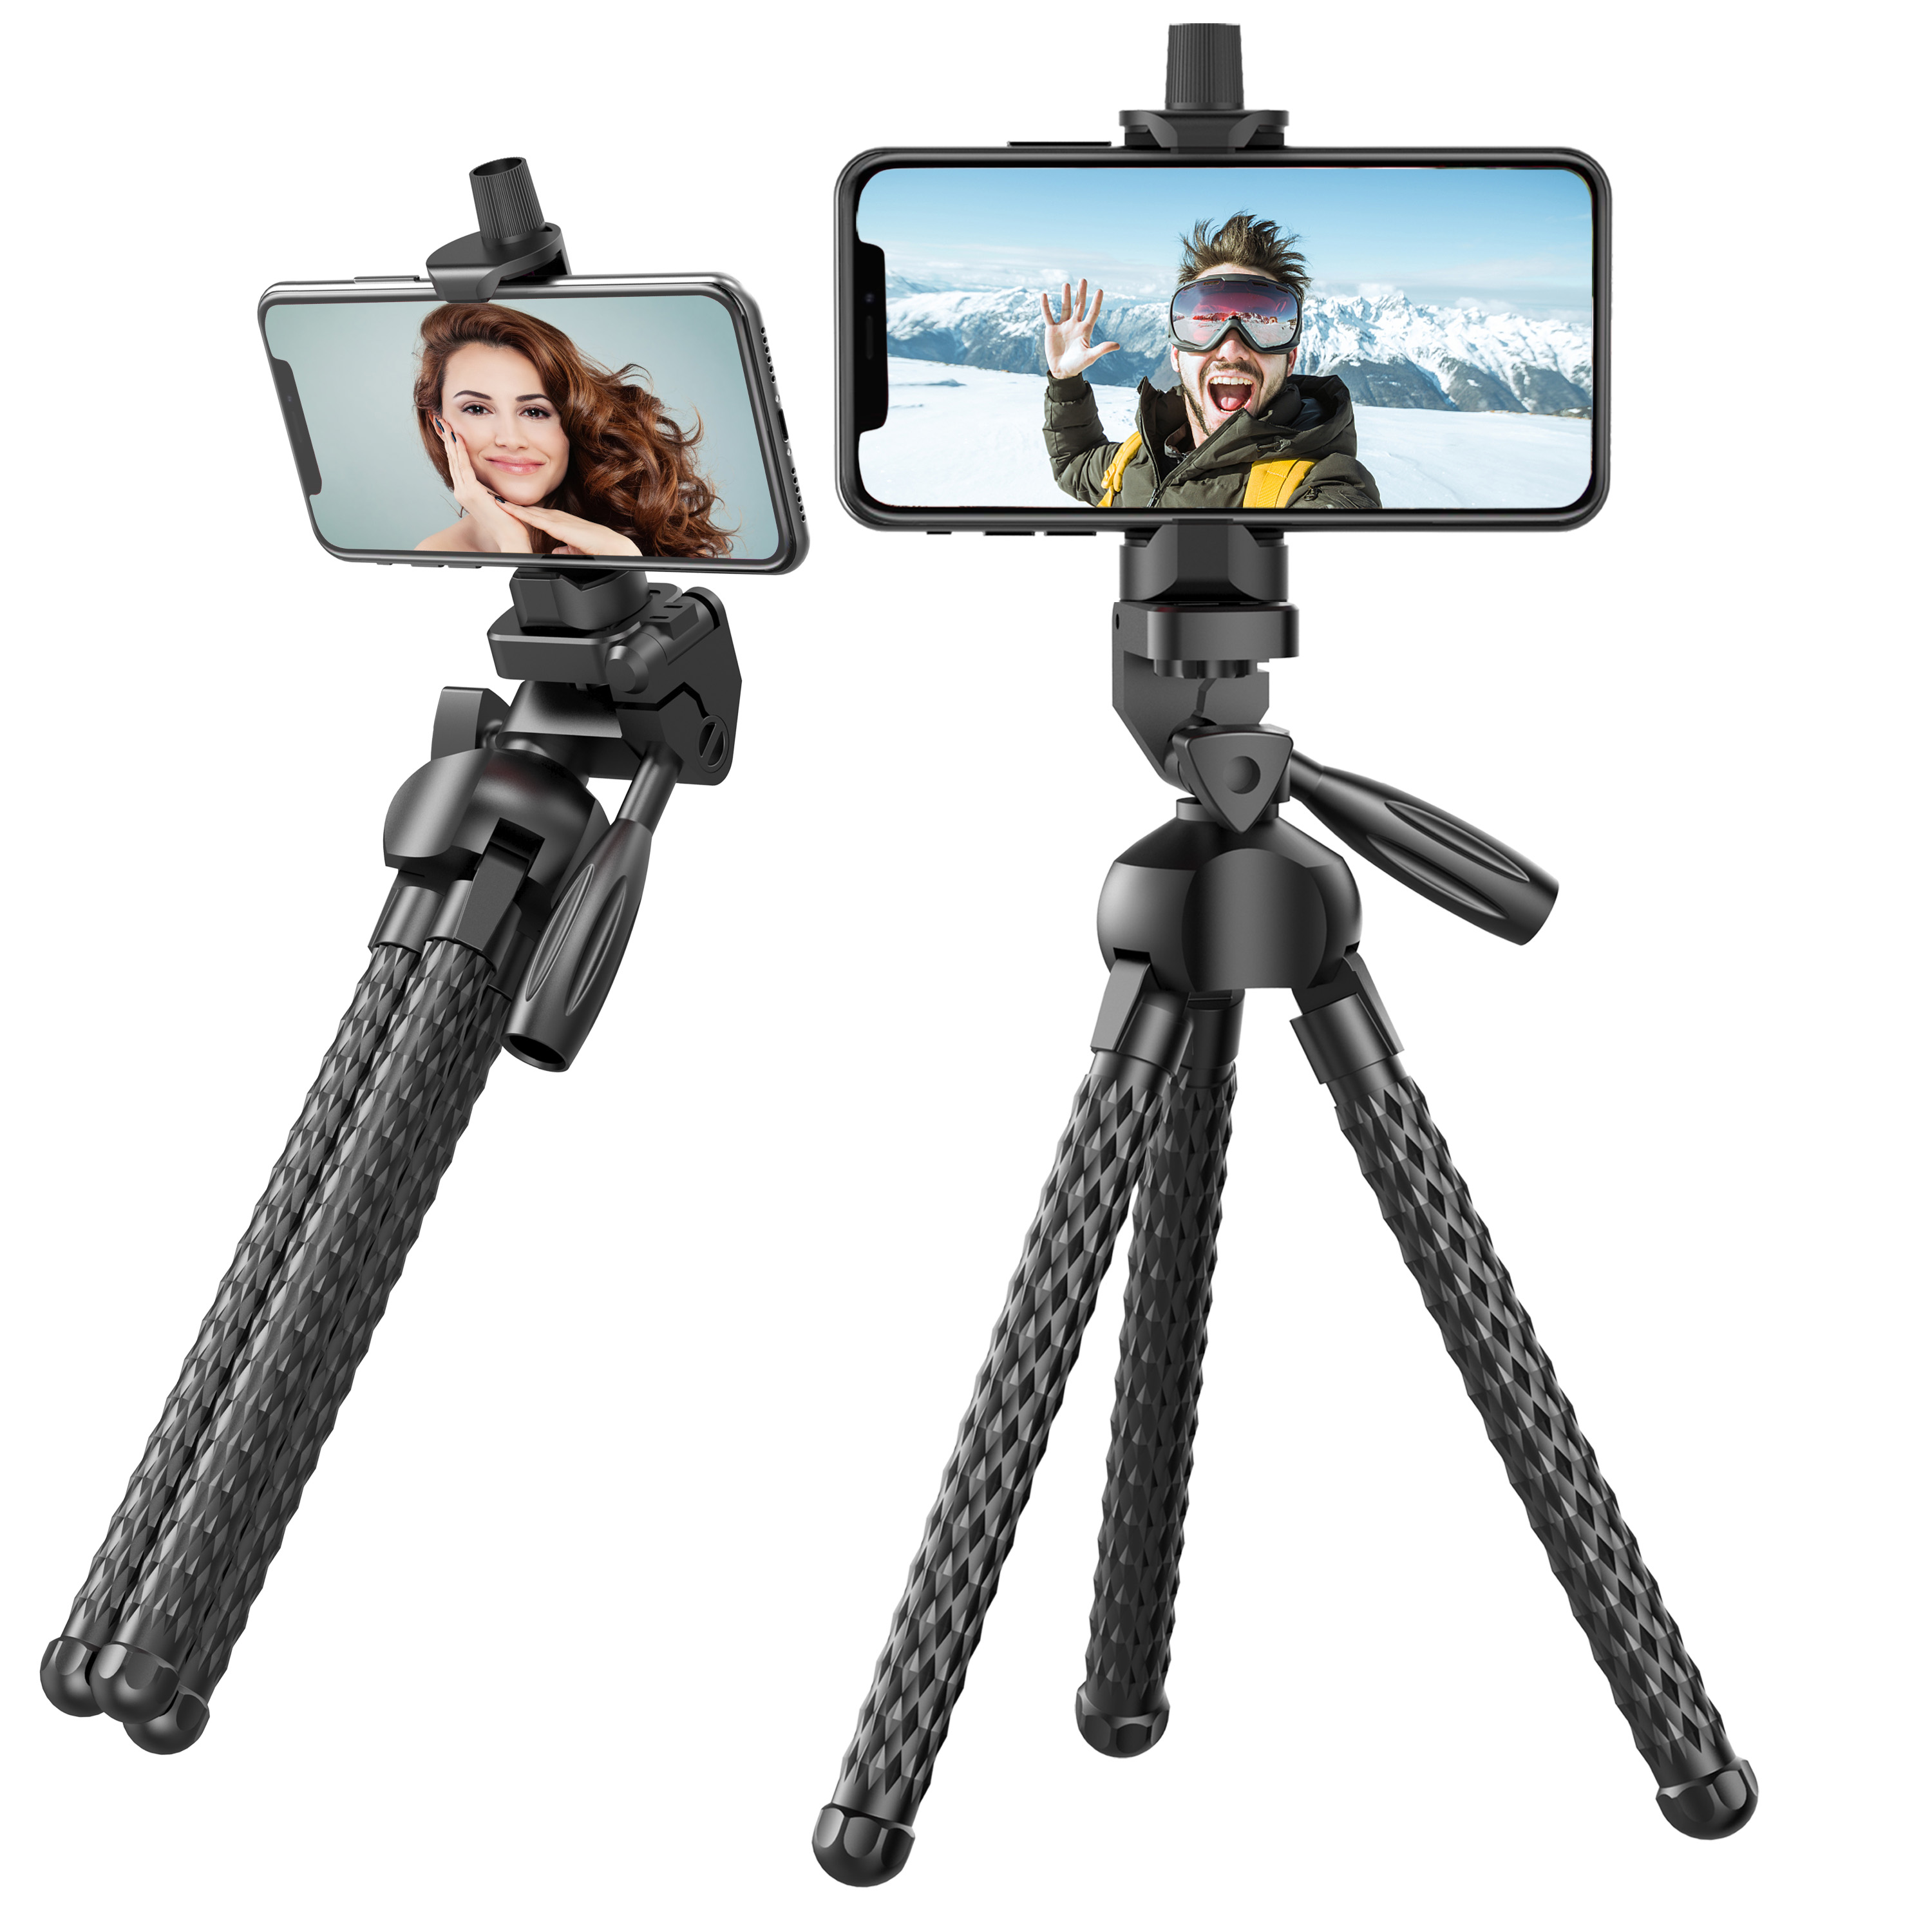 Phone Tripod, Portable Cell Phone Camera Tripod Stand with Wireless Remote, Flexible Tripod Stand for Selfies/Vlogging/Streaming/Photography Compatible with All Cell Phone, Sports Camera GoPro